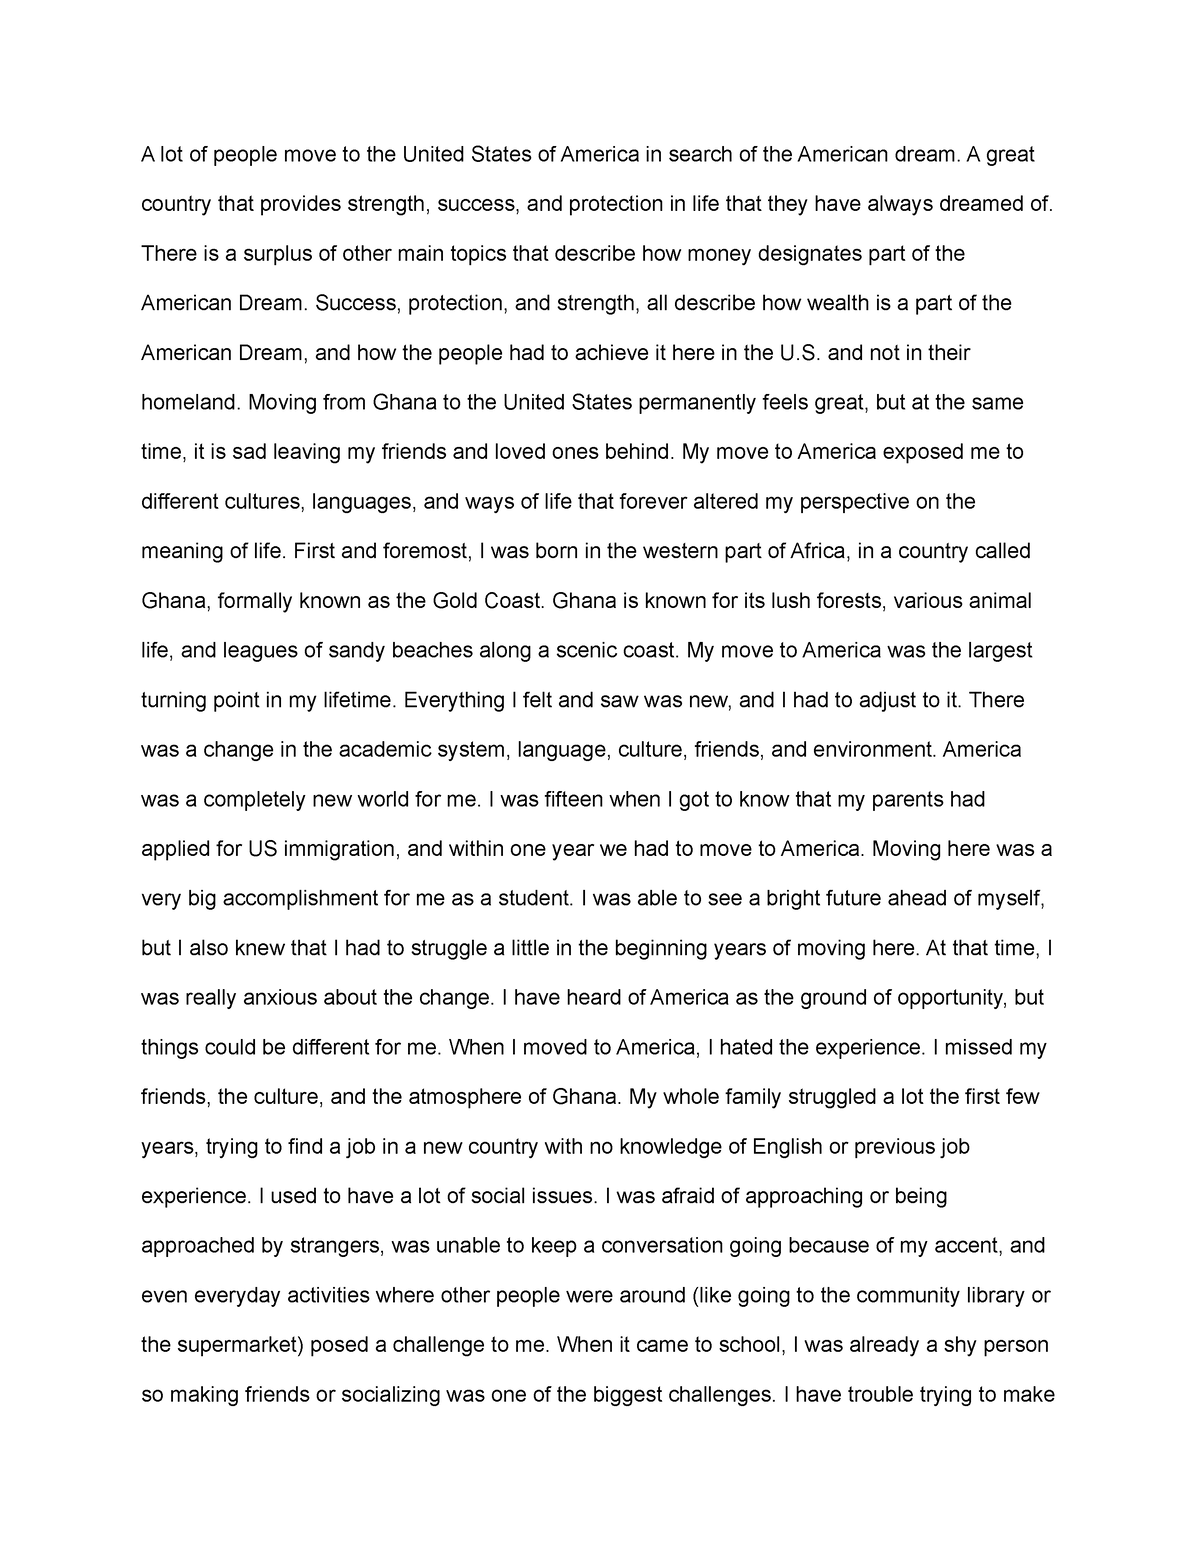 college essay about moving to america